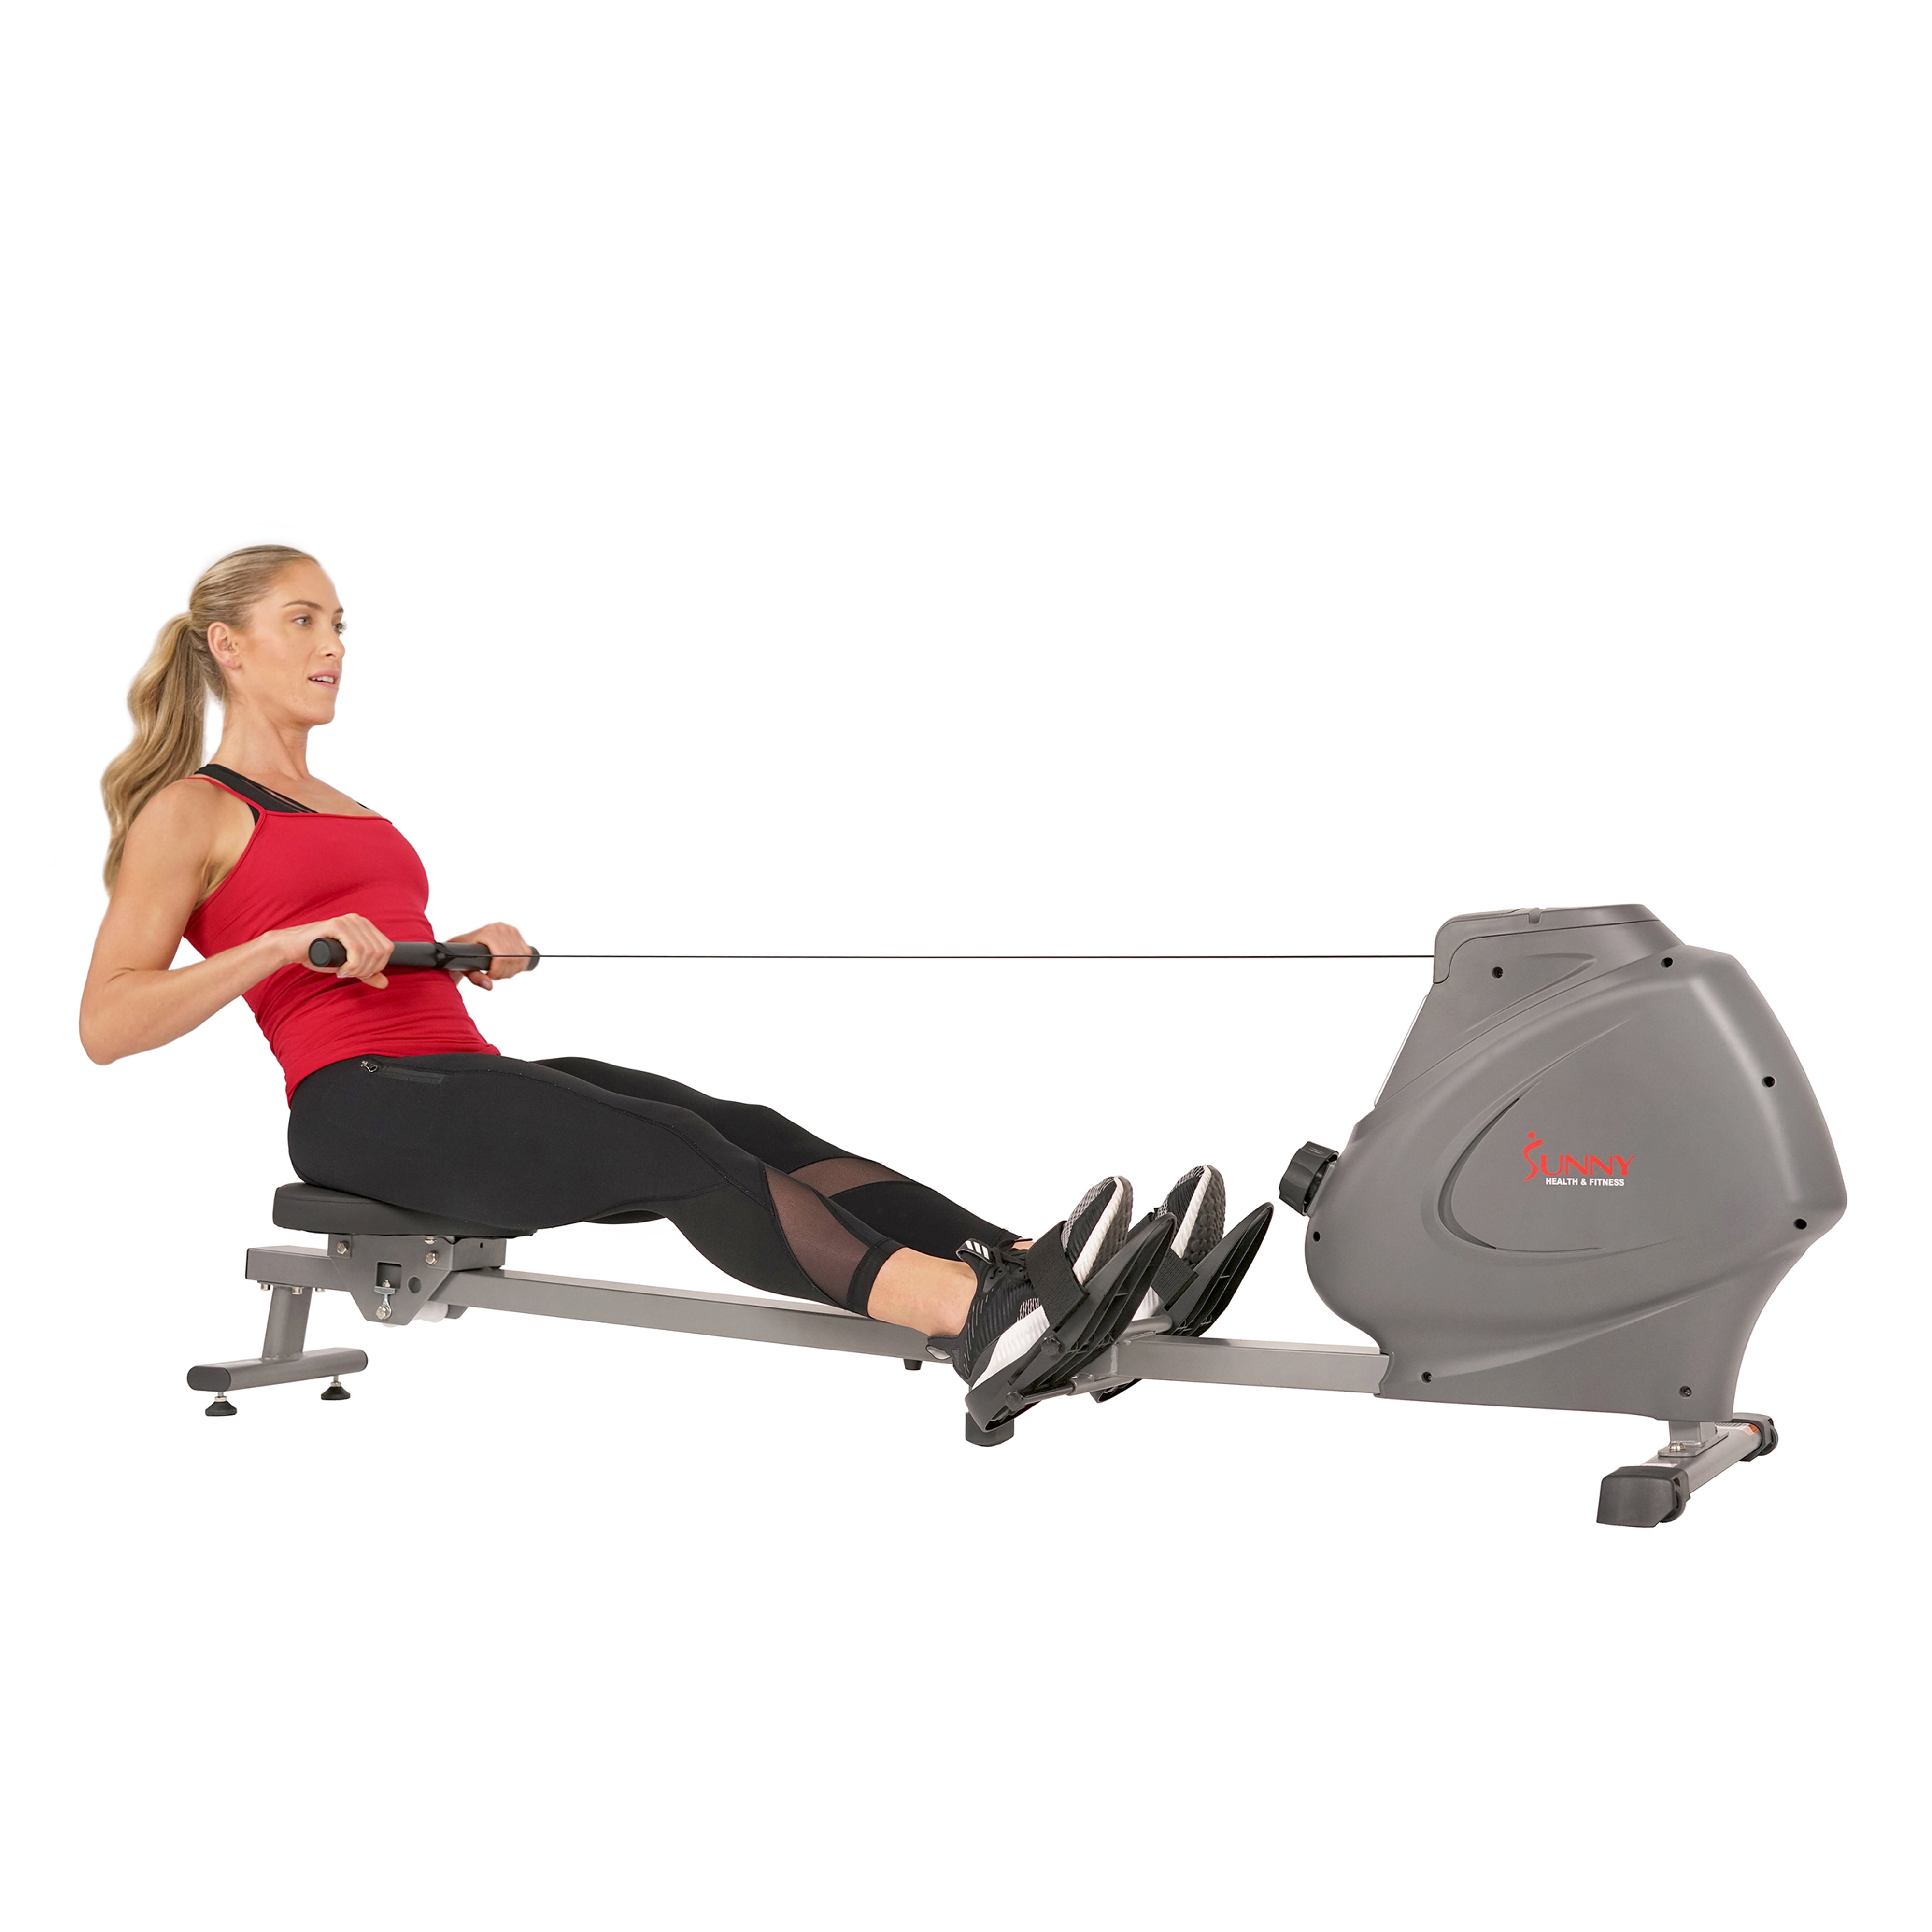 Stamina AIR ROWER Cardio Exercise Rowing Machine 35-1399 ATS NEW 2019 MFR.DIRECT 